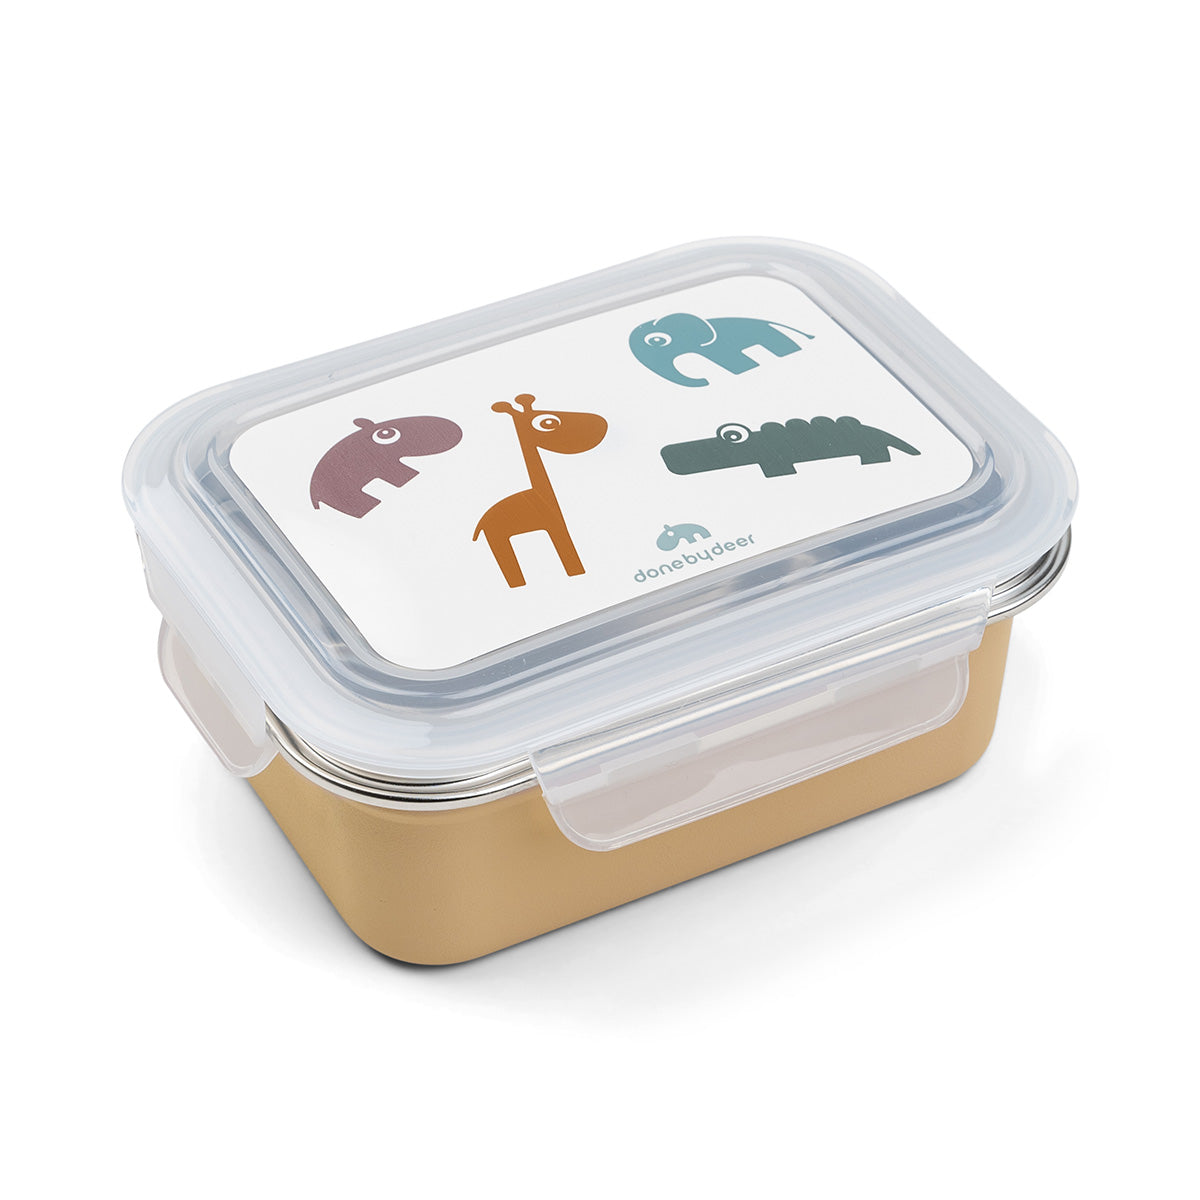 Designer Small Snack Boxes for Boys School Lunch Box - Water Animals